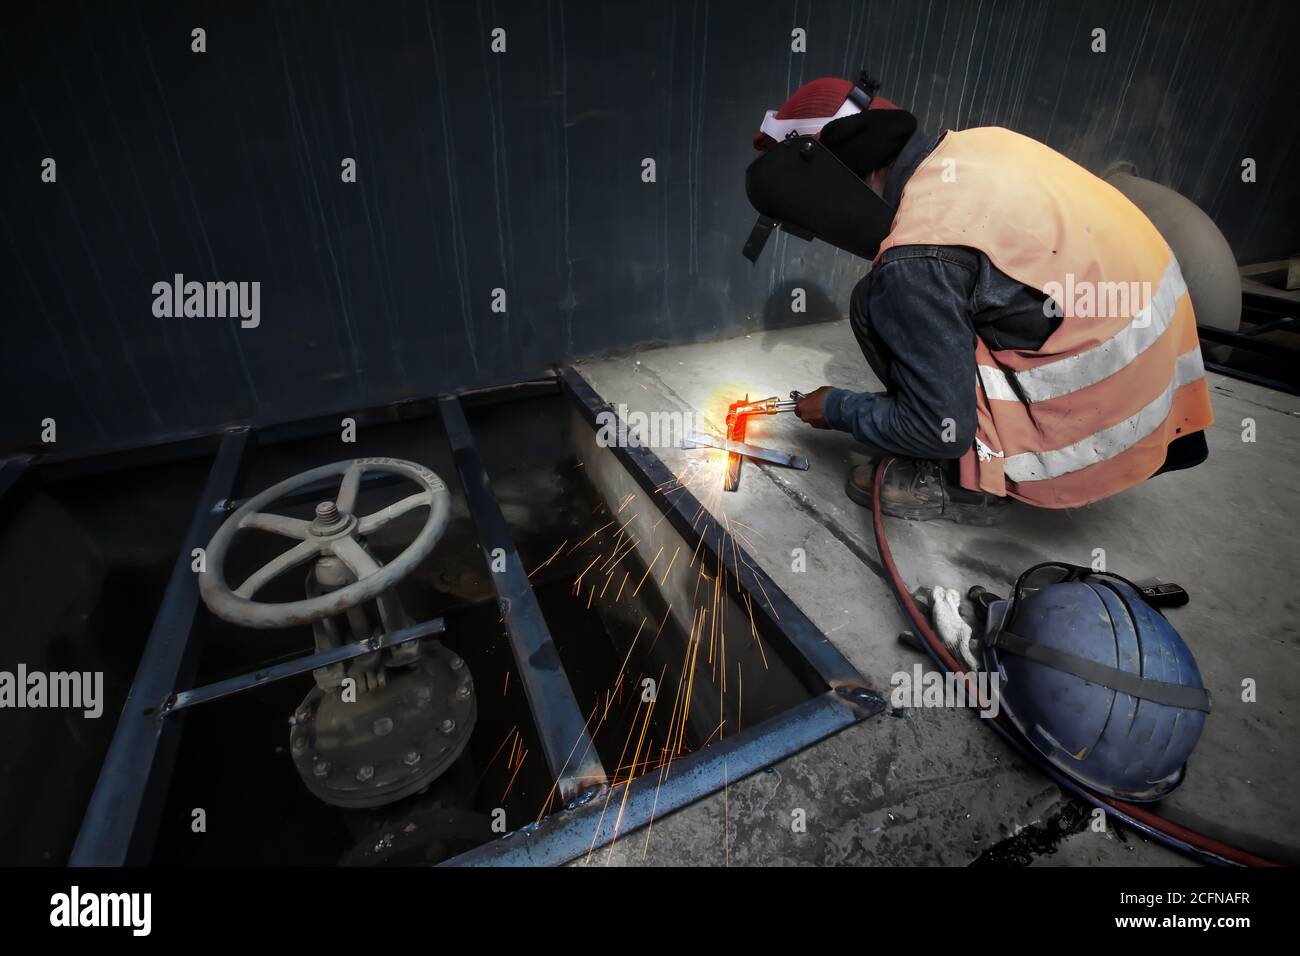 Asian man welding a metal grate, arc welding process with sparks. Long exposure. Focus on sparkling. Stock Photo